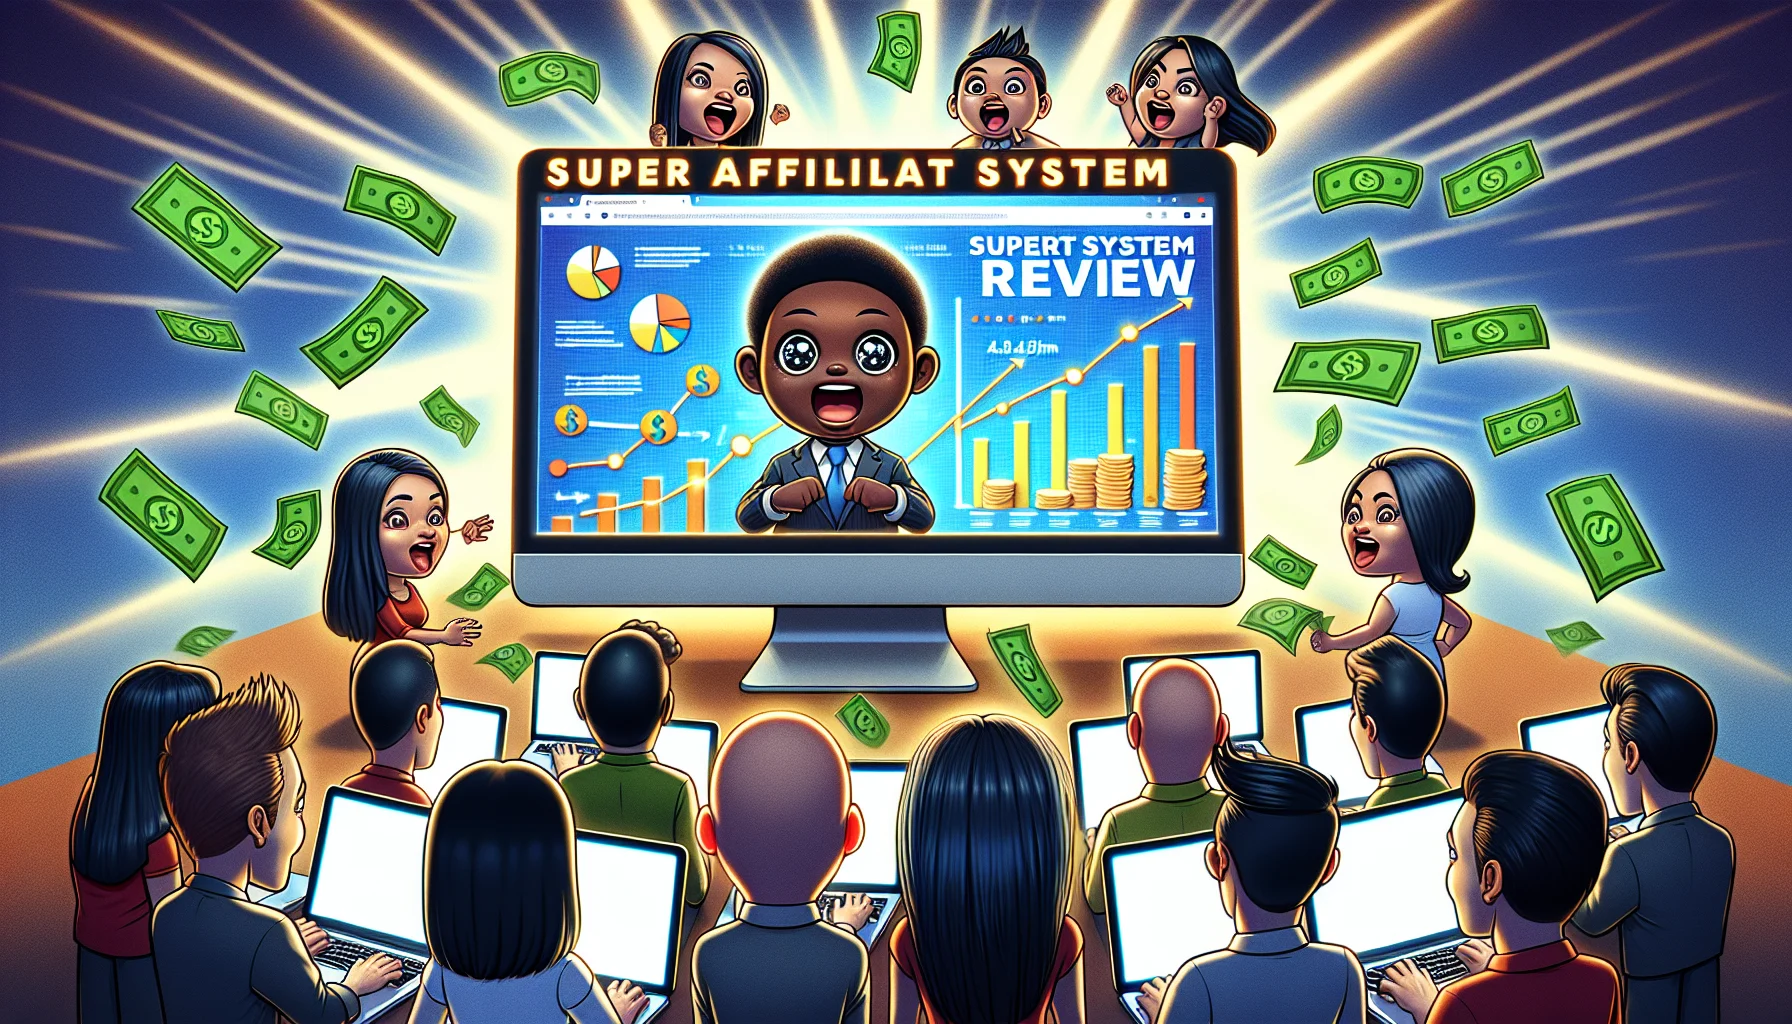 Imagine a humorous and realistic scene related to online wealth creation. In the center, there's a giant computer screen, glowing with the words 'Super Affiliate System Review'. On the screen, dynamic graphs and statistics illustrate success and high returns. Surrounding the computer, cartoon-styled characters - an ambitious Asian woman, a crafty Black man, a determined Middle-Eastern man, and a disciplined Hispanic woman - are eagerly following the review, with sparkling eyes full of aspirations. Their laptops are open, showing numerous successful transactions, as dollar bills 'fly' out of their screens, symbolizing their potential financial gains.